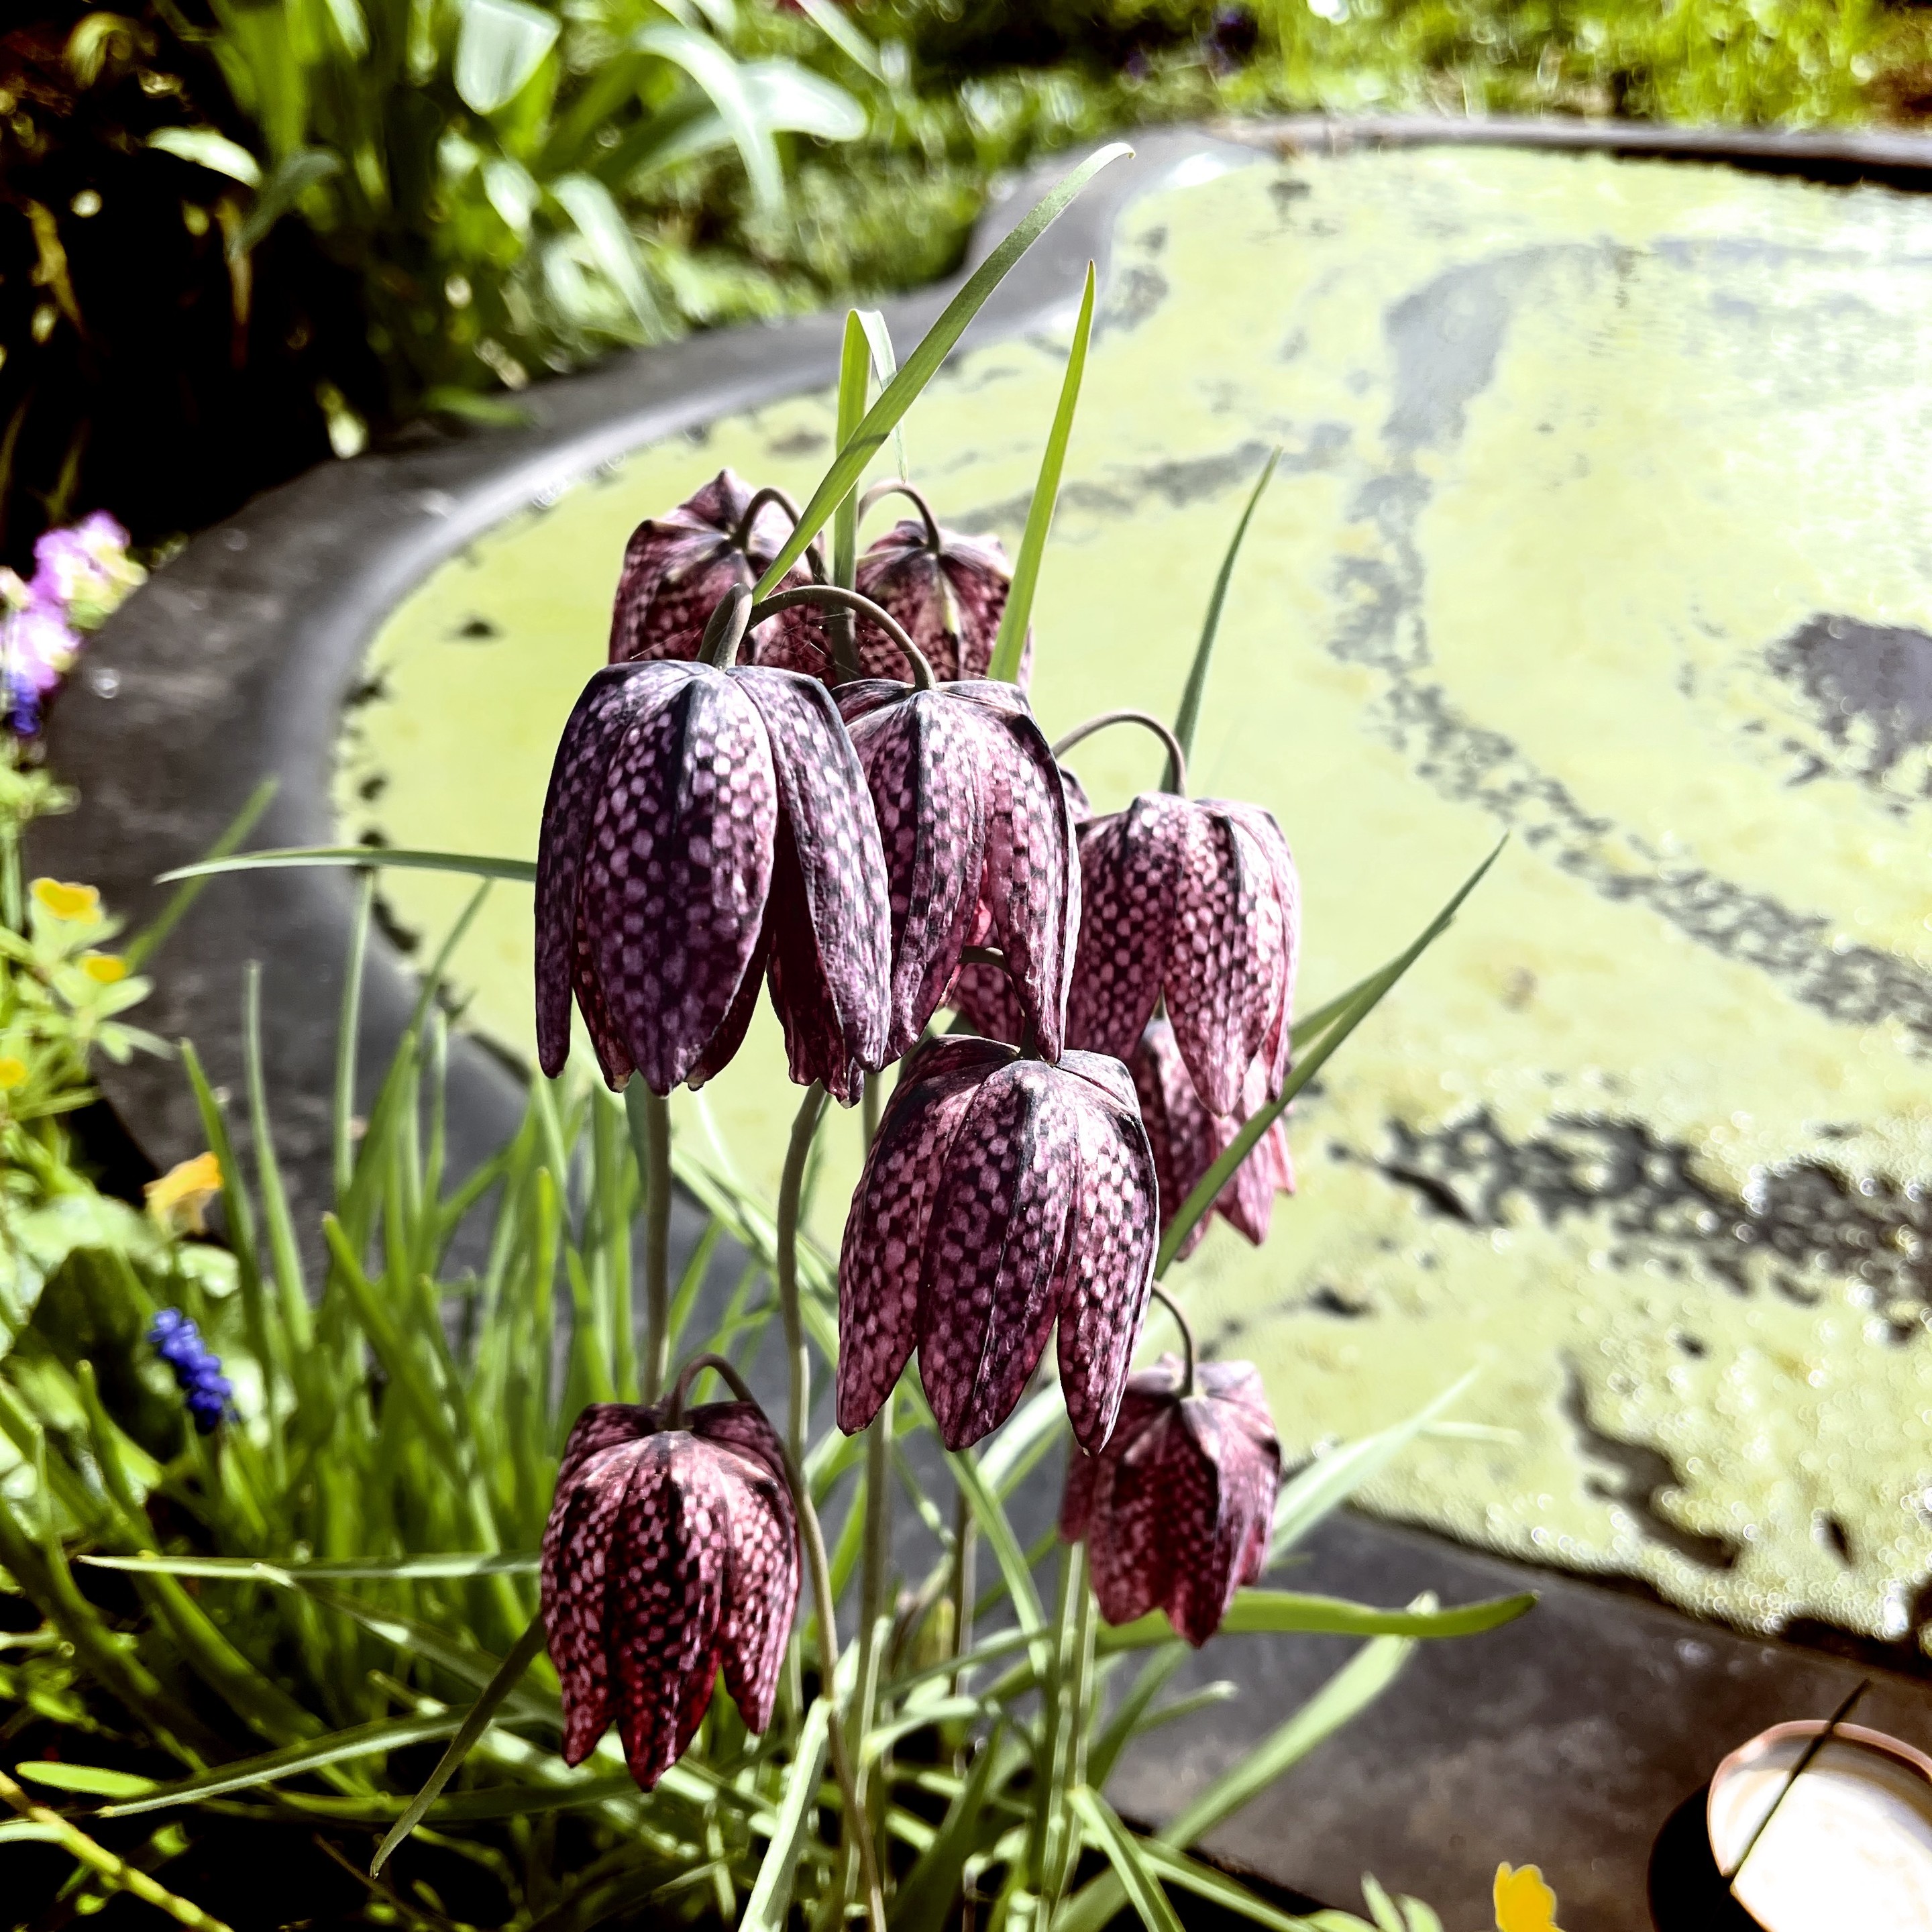 A cluster of purple checkered flowers (Fritillaria meleagris) by a pond with green algae.